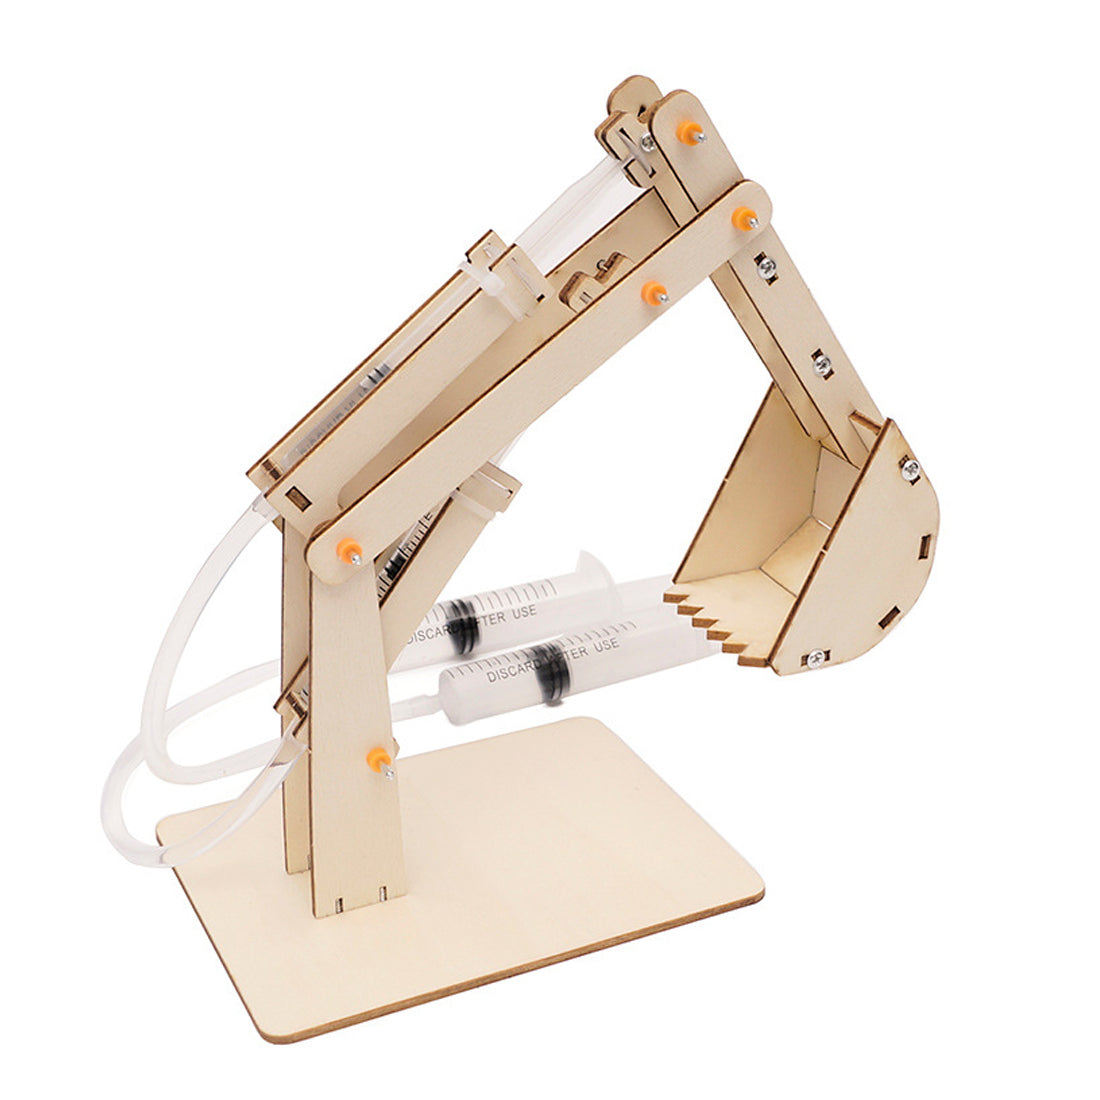 DIY Wooden Hydraulic Excavator Two Degree of Motion Science Experiments Kit